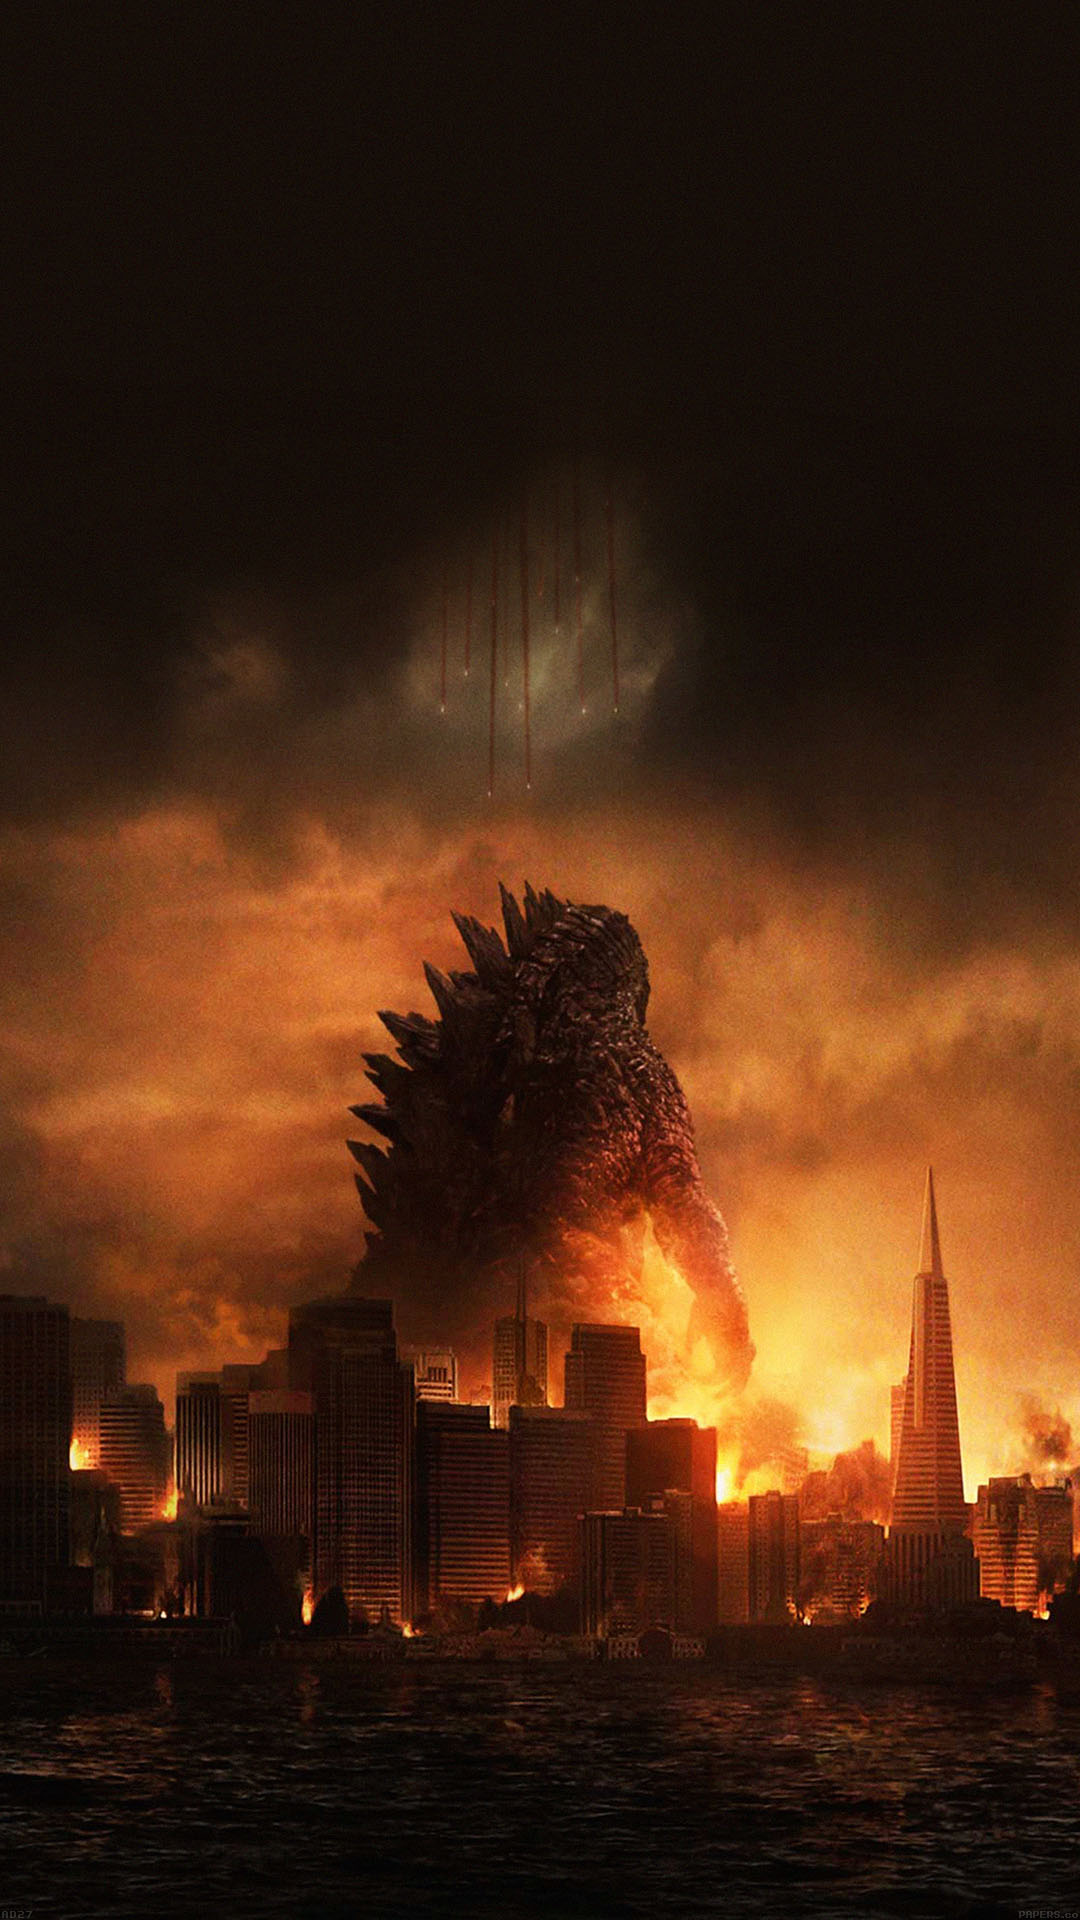 Godzilla Poster Film Android Wallpaper Android Hd Wallpapers